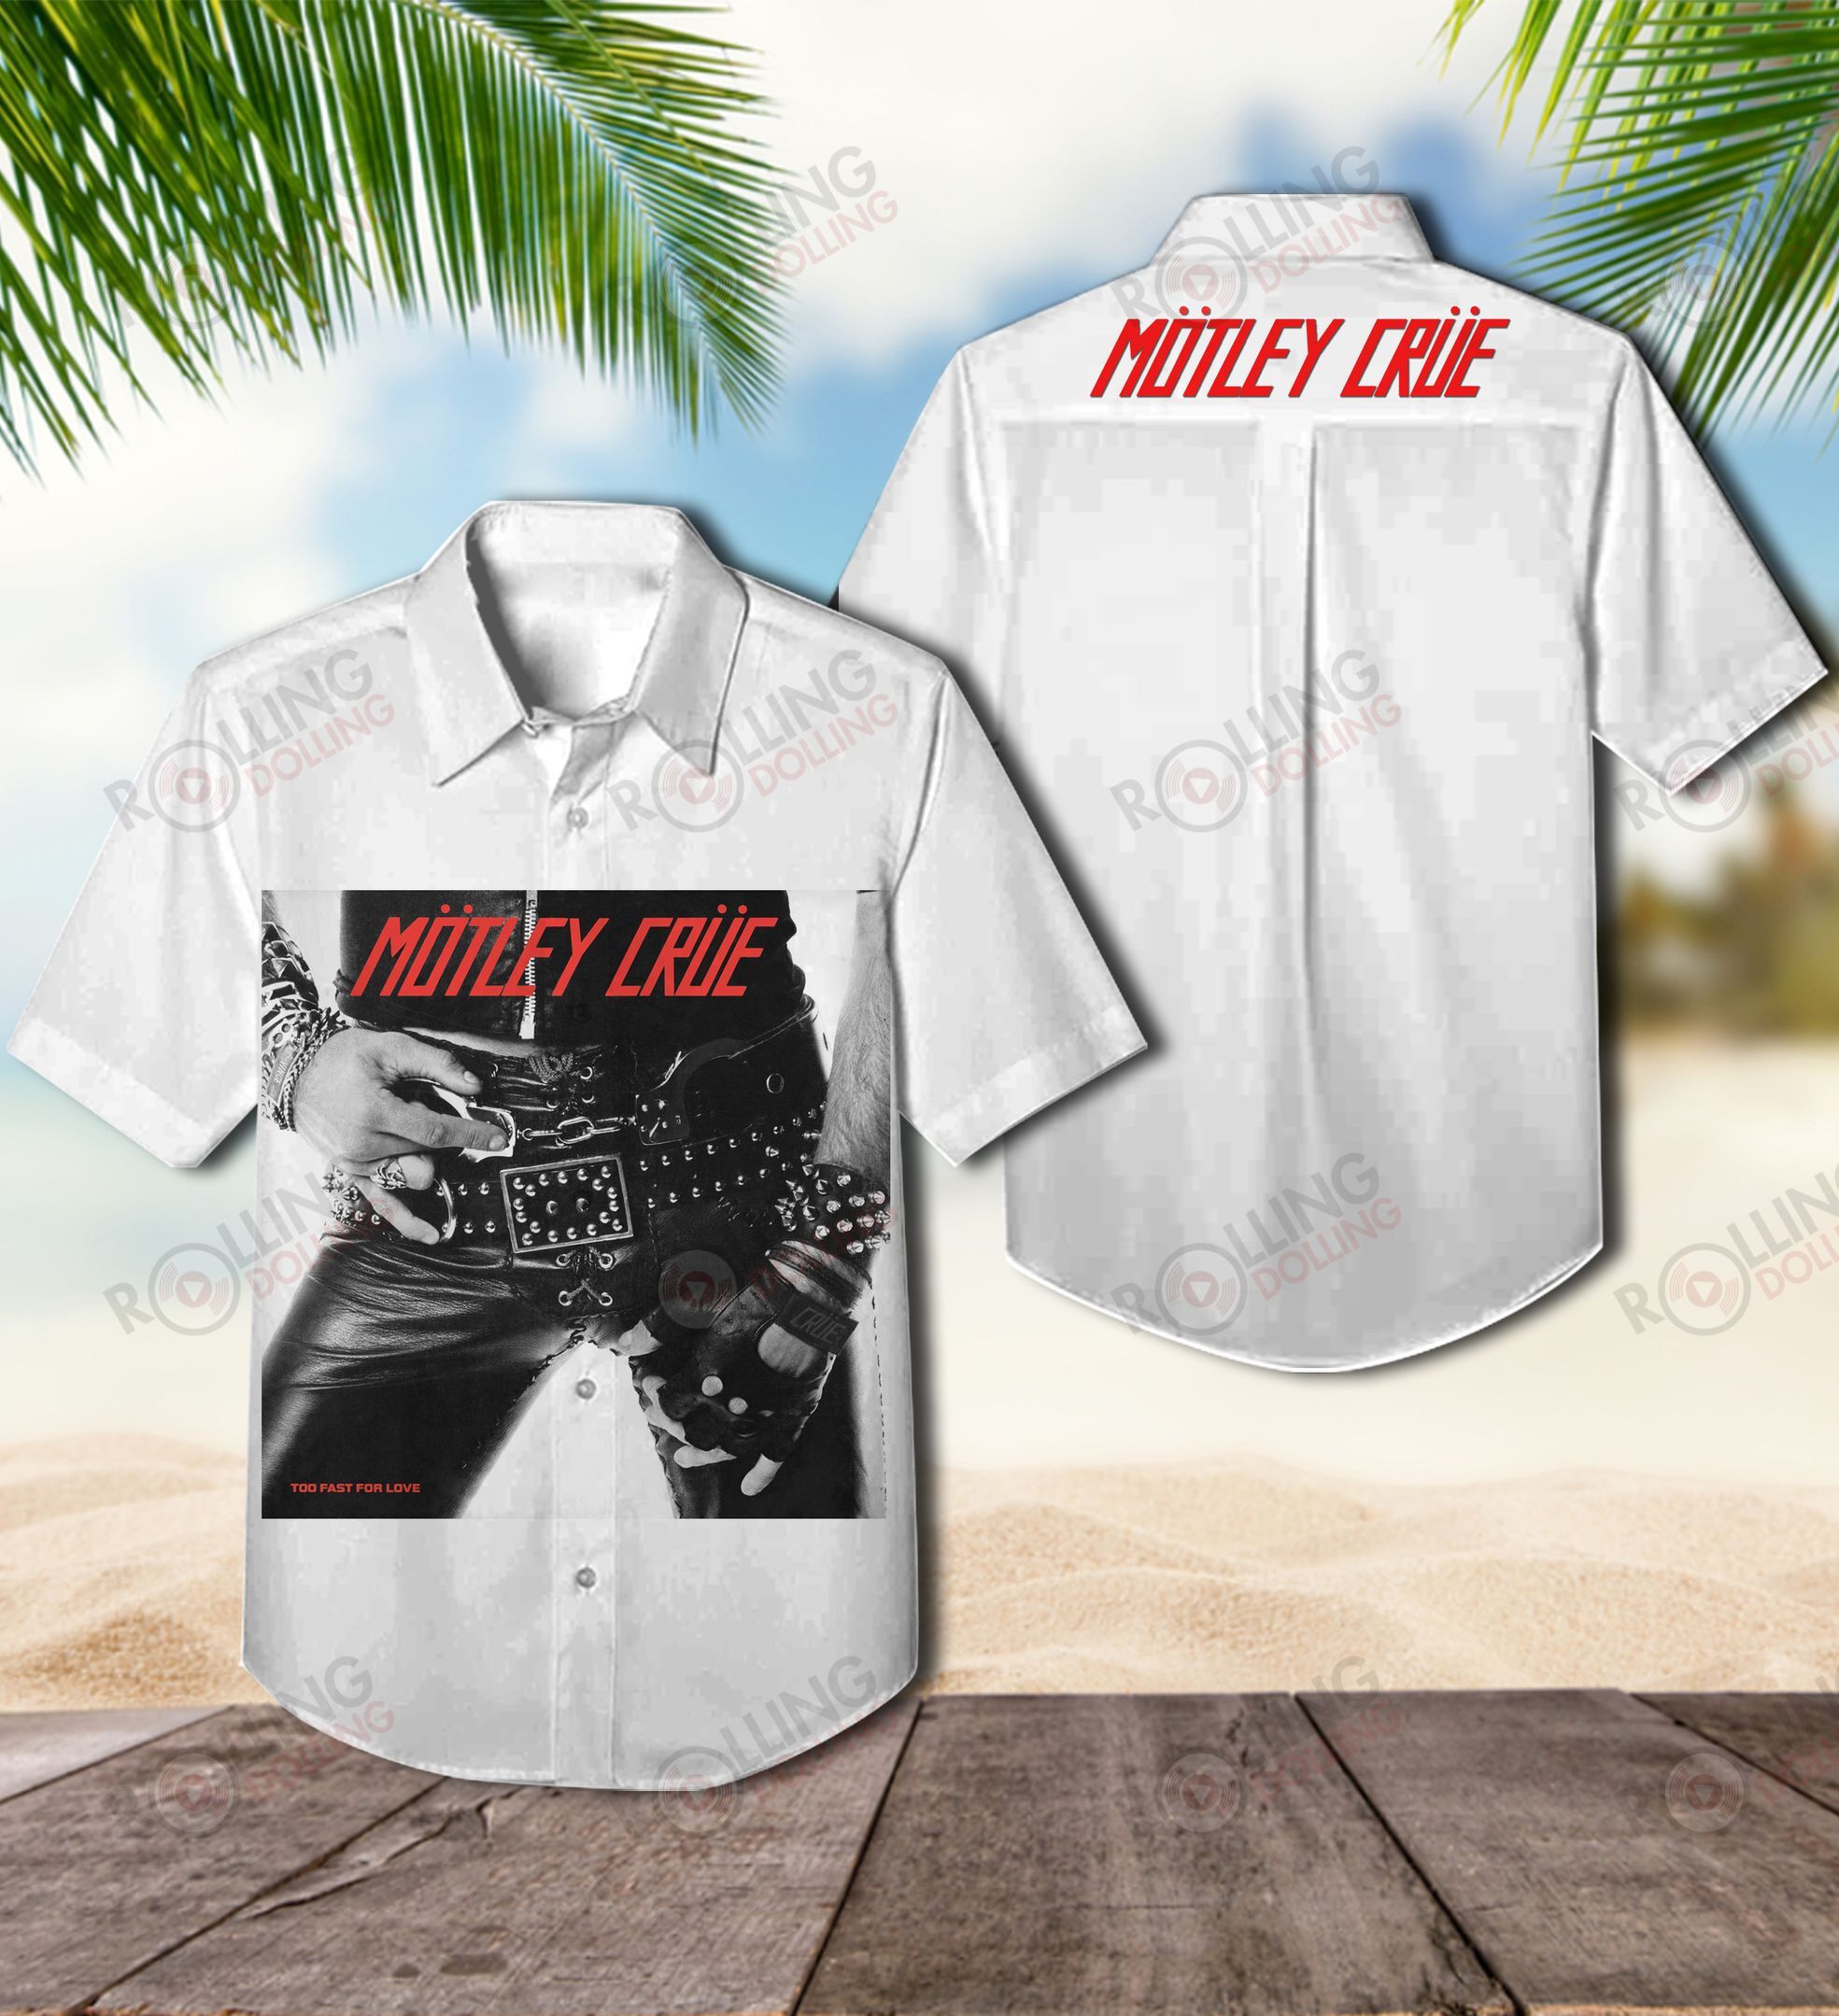 This would make a great gift for any fan who loves Hawaiian Shirt as well as Rock band 93